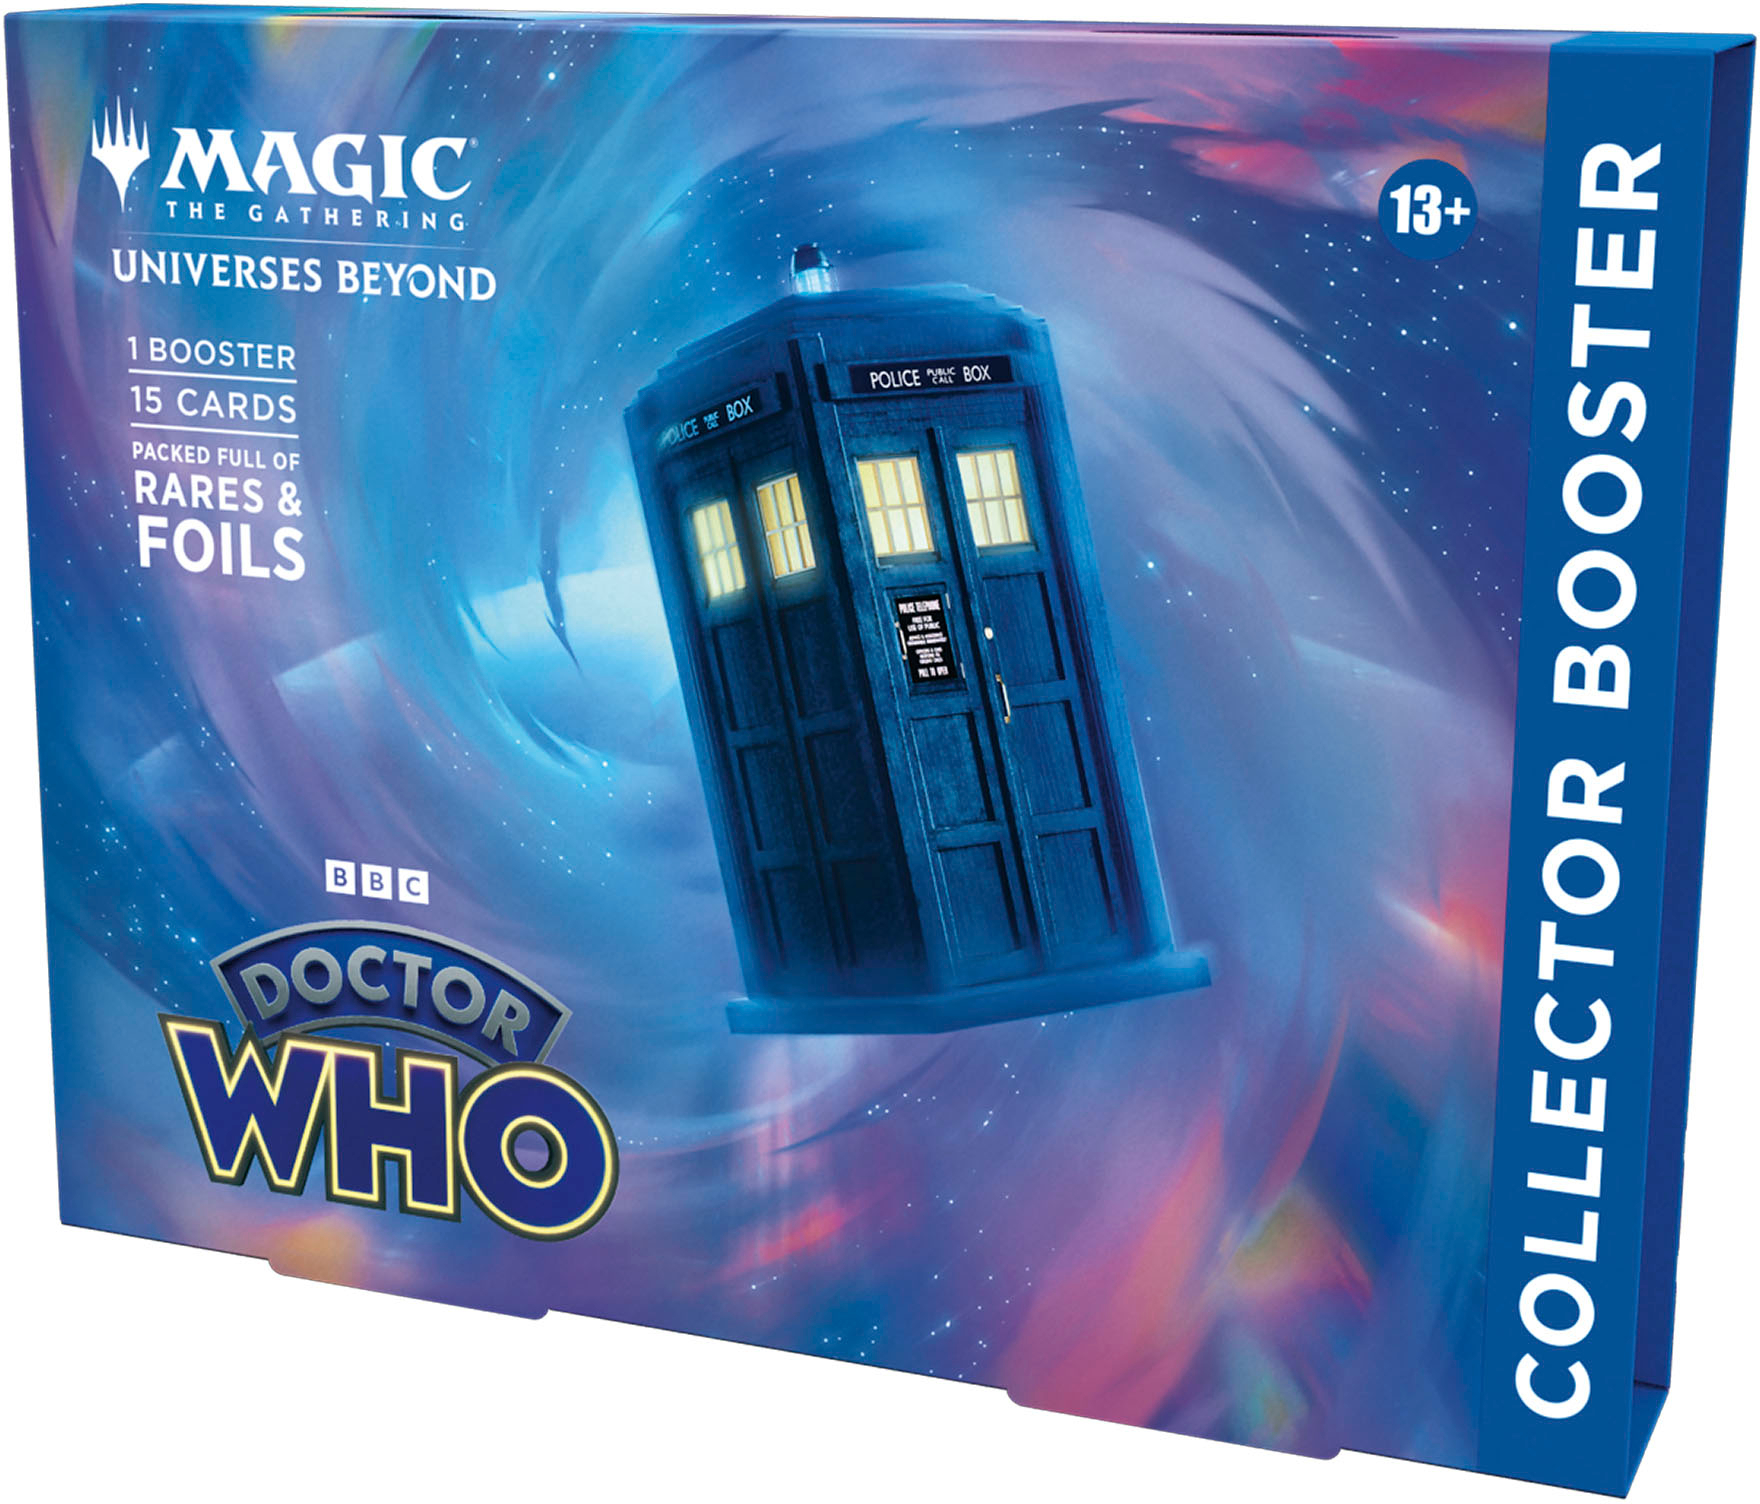 Magic The Gathering – Doctor Who Collector Booster (15 Magic Cards)